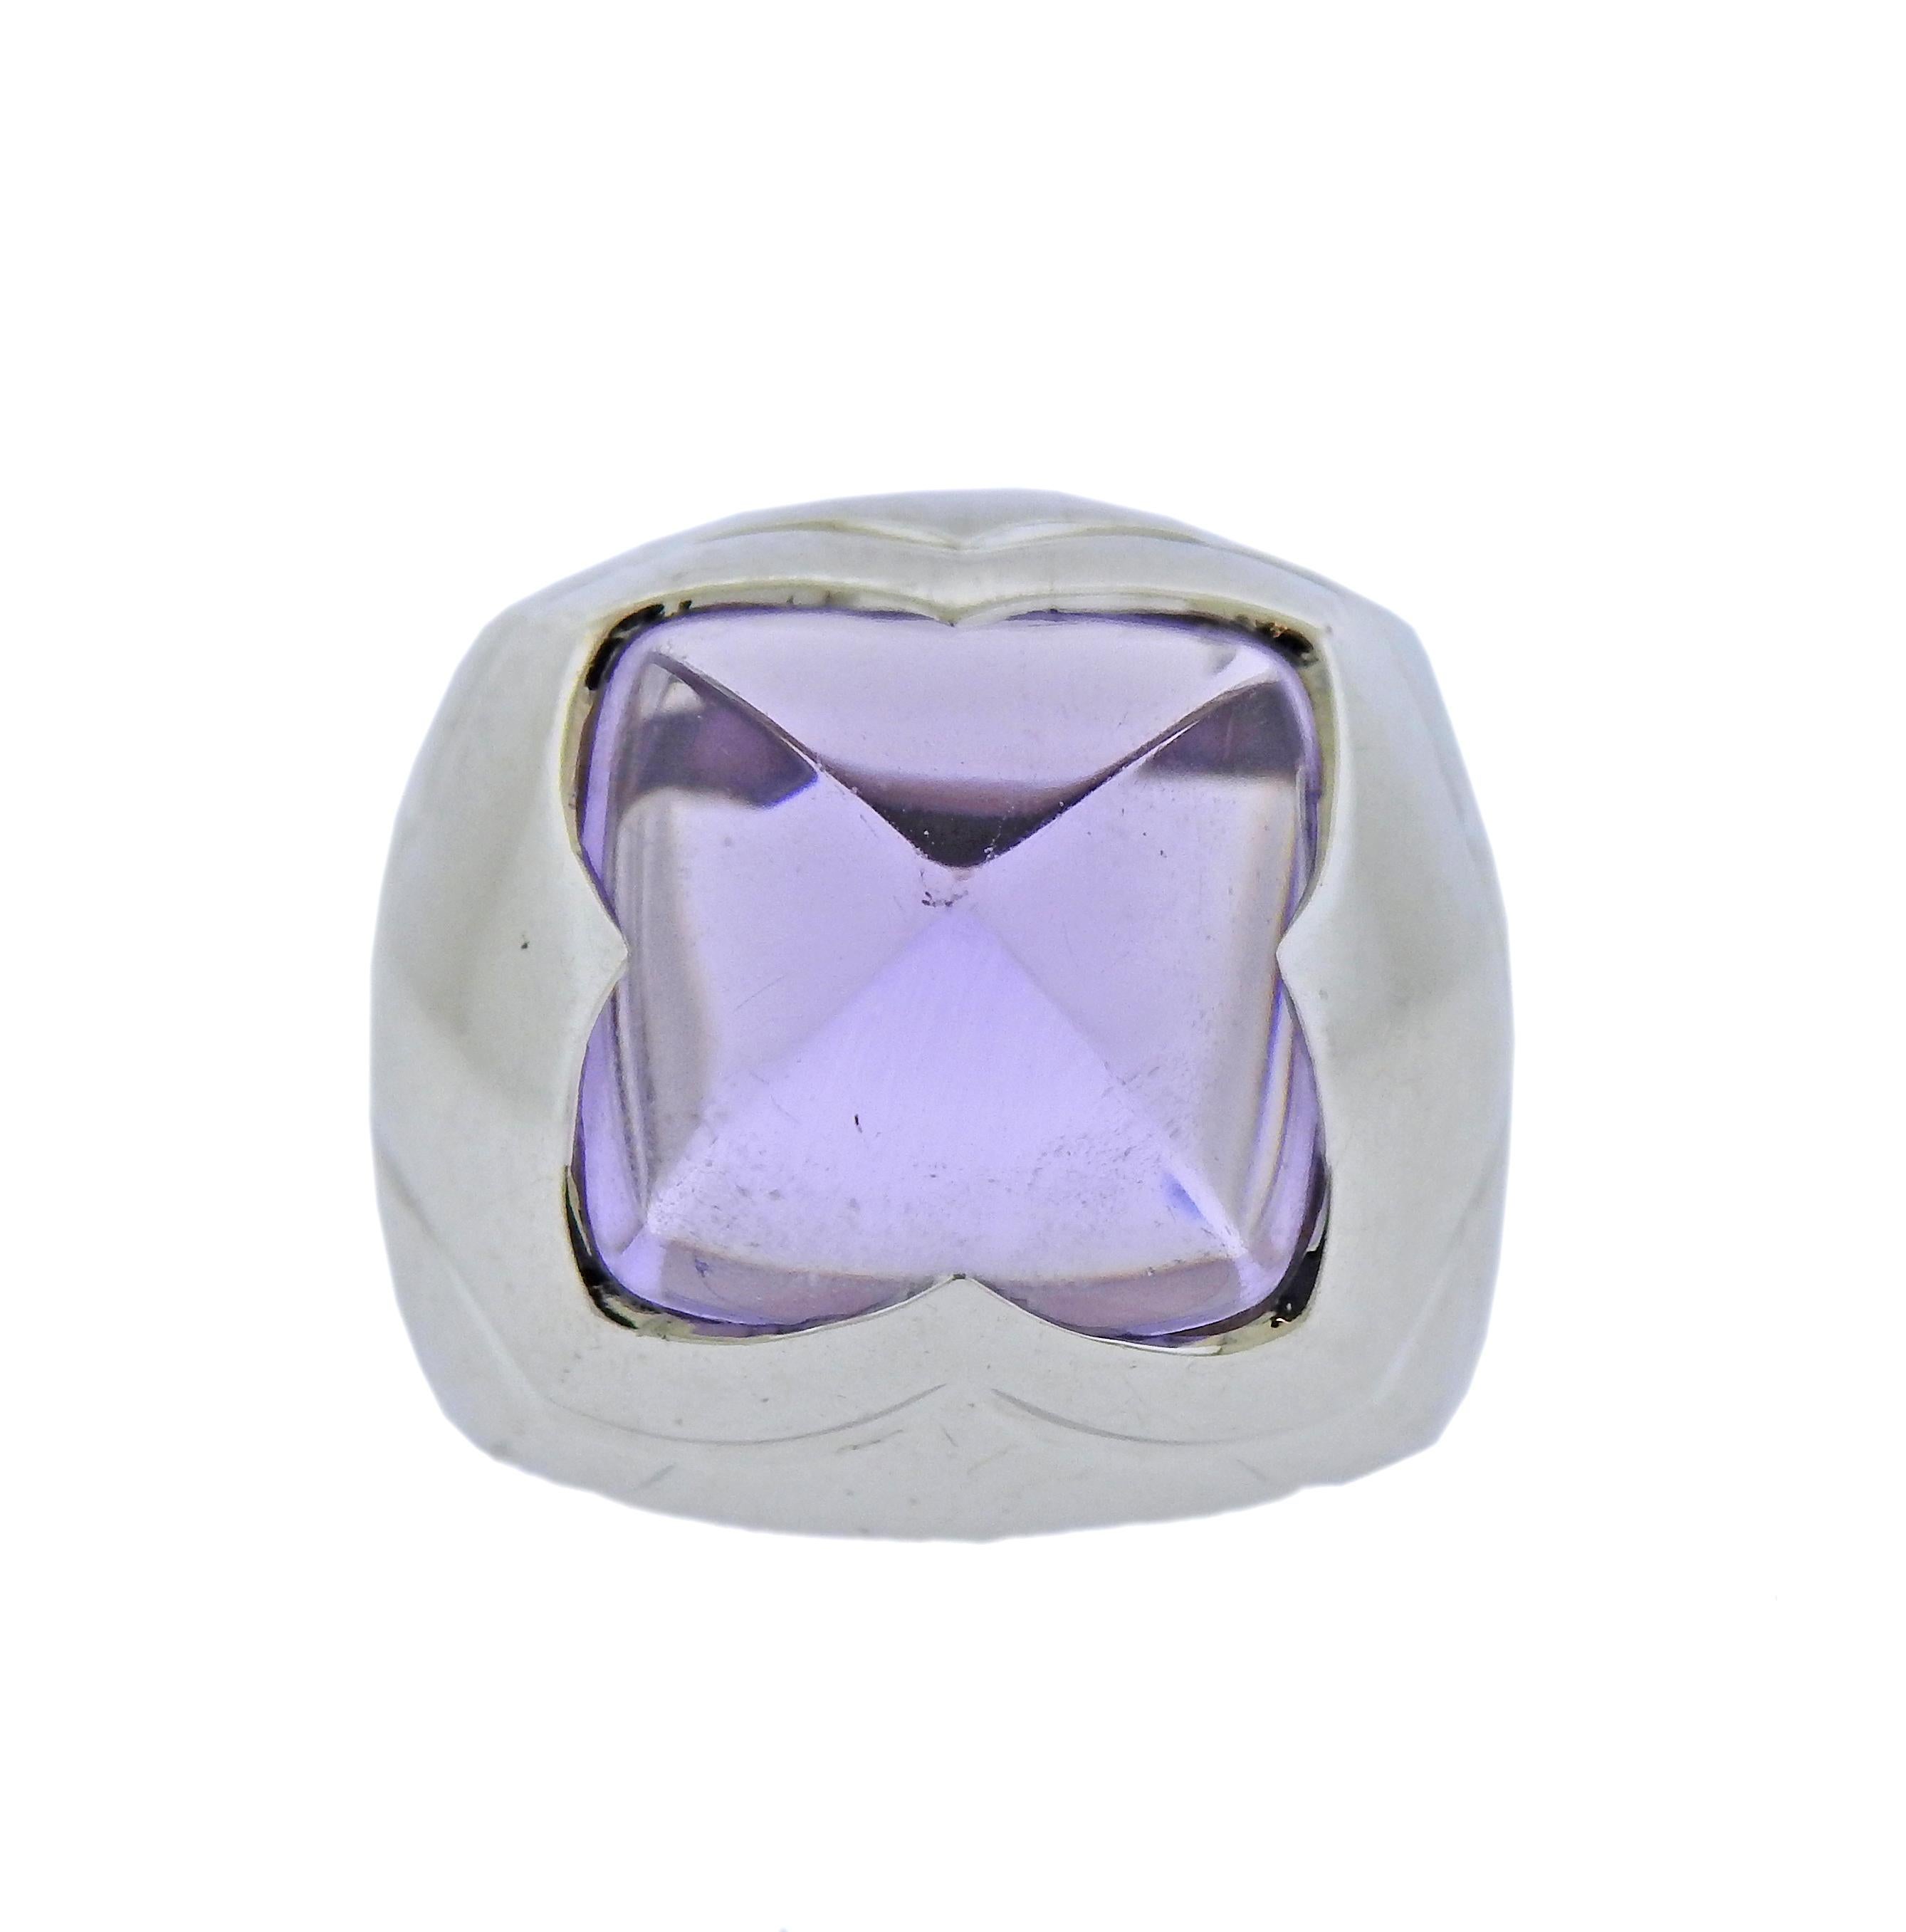 18k white gold ring by Bvlgari, from Pyramide collection, set with amethyst. Ring size - 5, ring top - 18mm x 18mm. Marked: Bvlgari, 750, made in Italy. Weight - 15.4 grams.